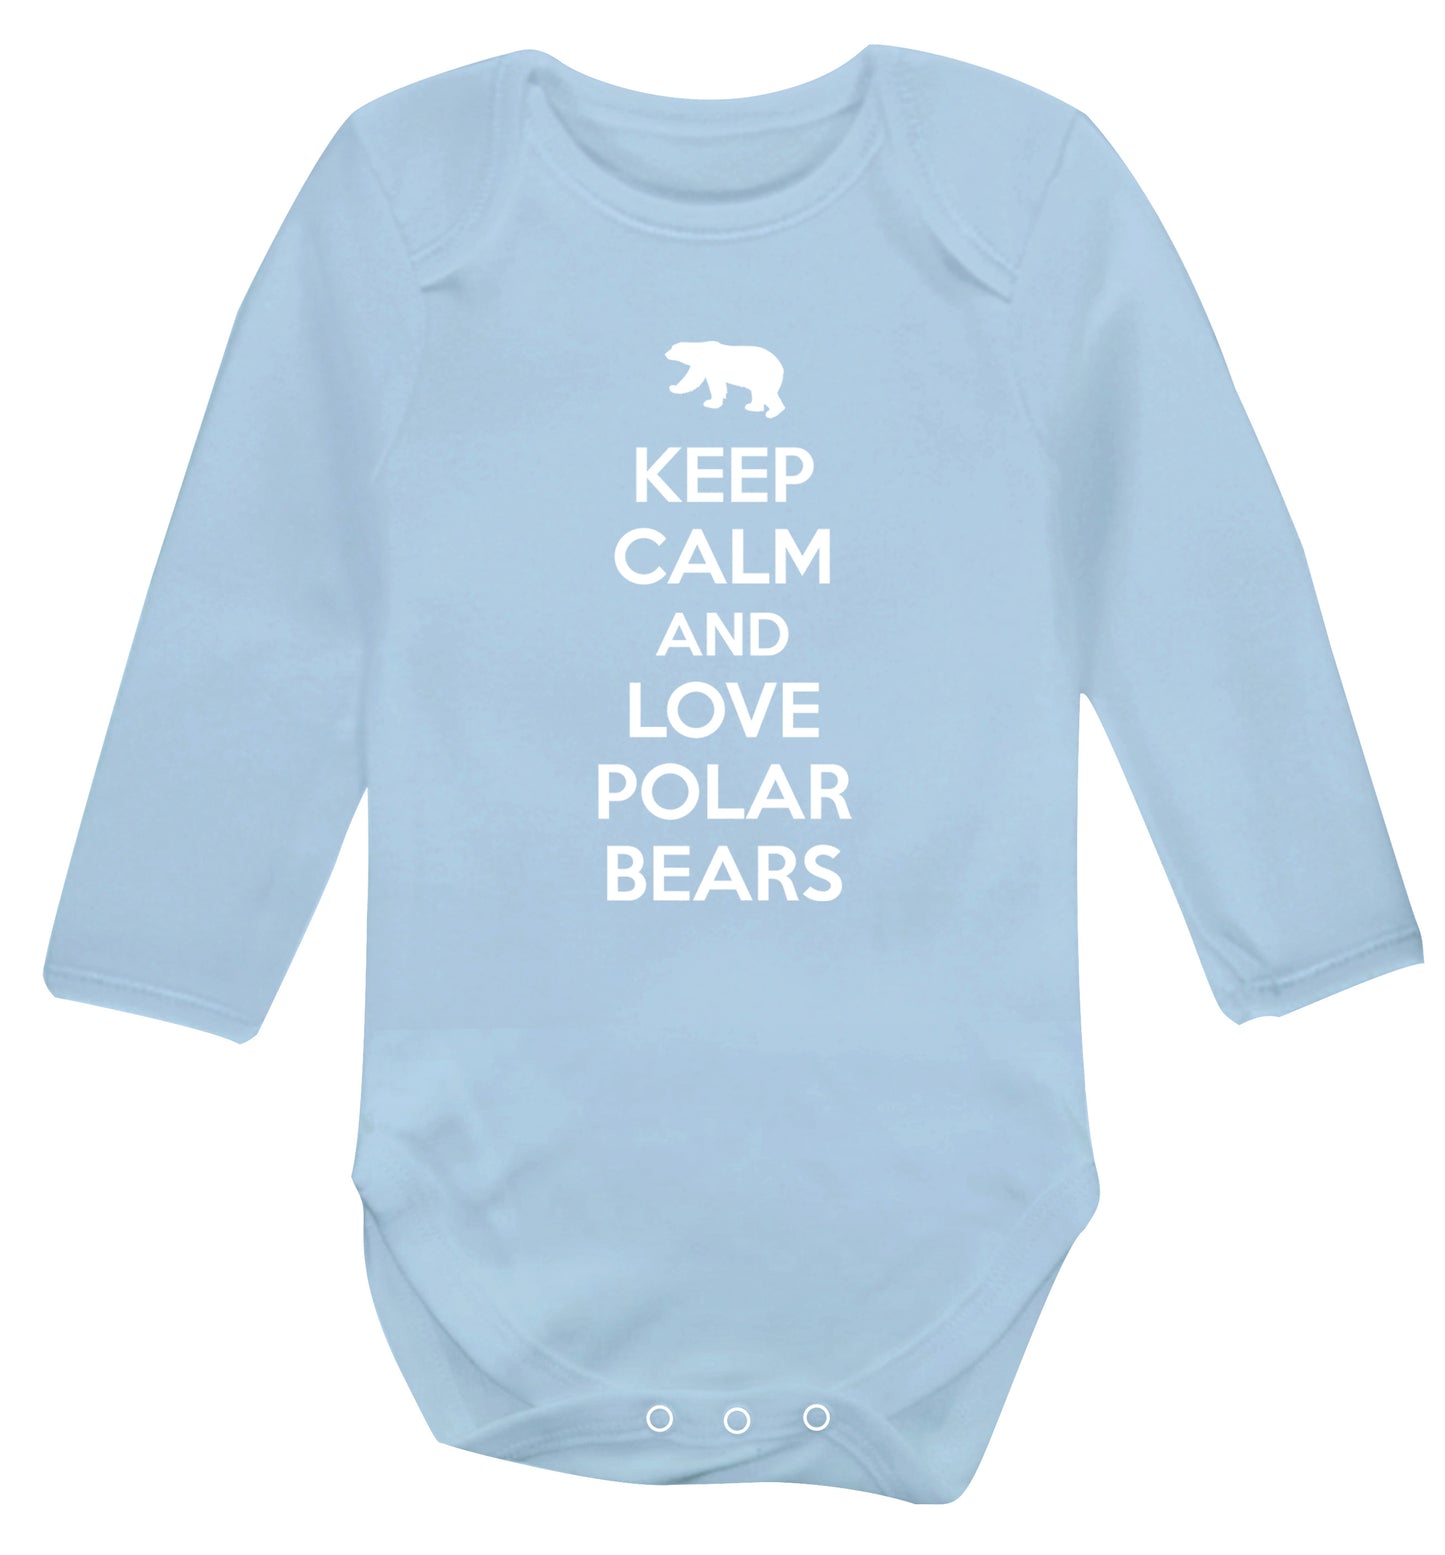 Keep calm and love polar bears Baby Vest long sleeved pale blue 6-12 months